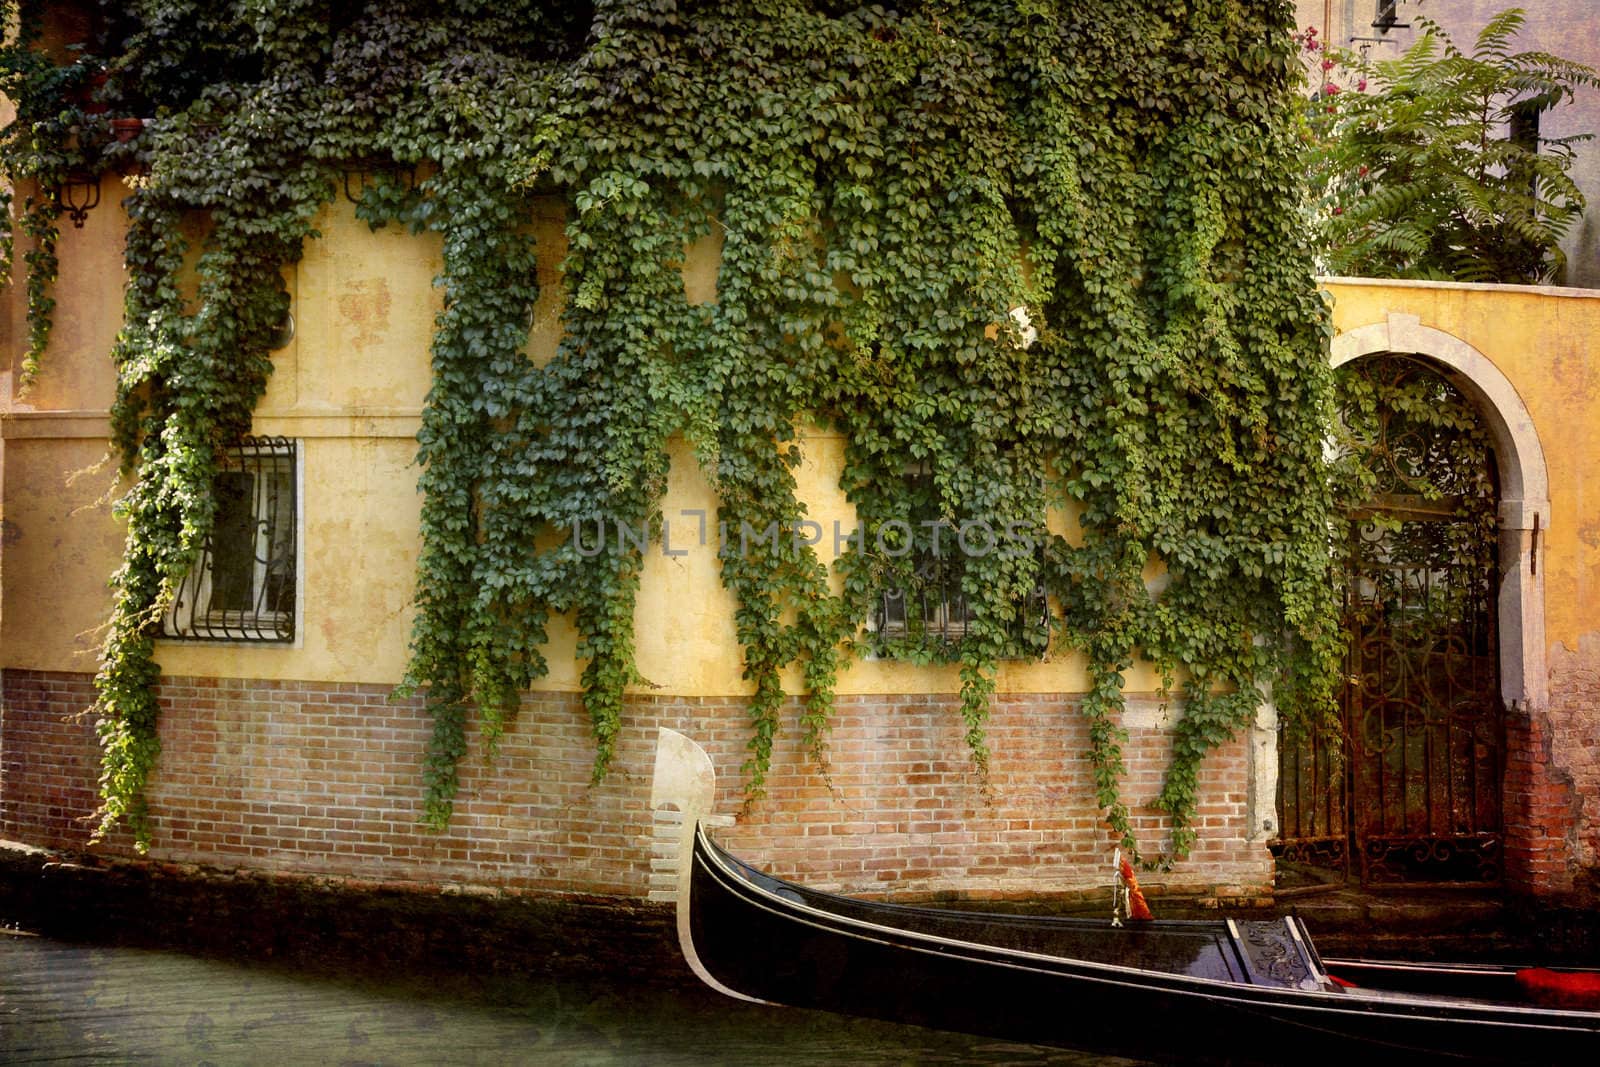 Artistic work of my own in retro style - Postcard from Italy. - Ivy and gondola - Venice.